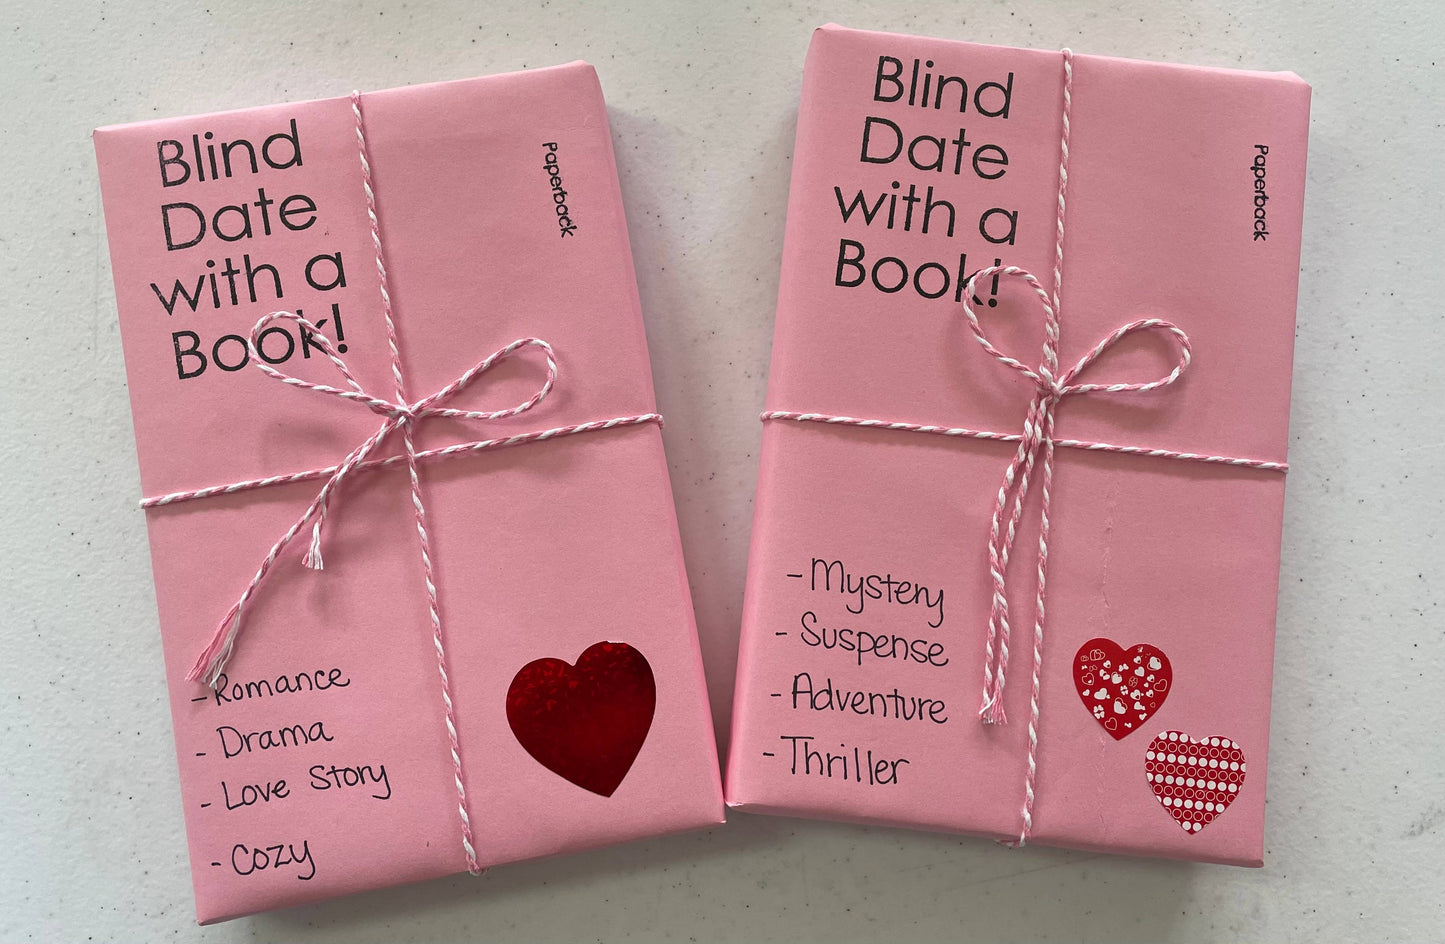 Blind Date With a Book - Valentines Day Edition